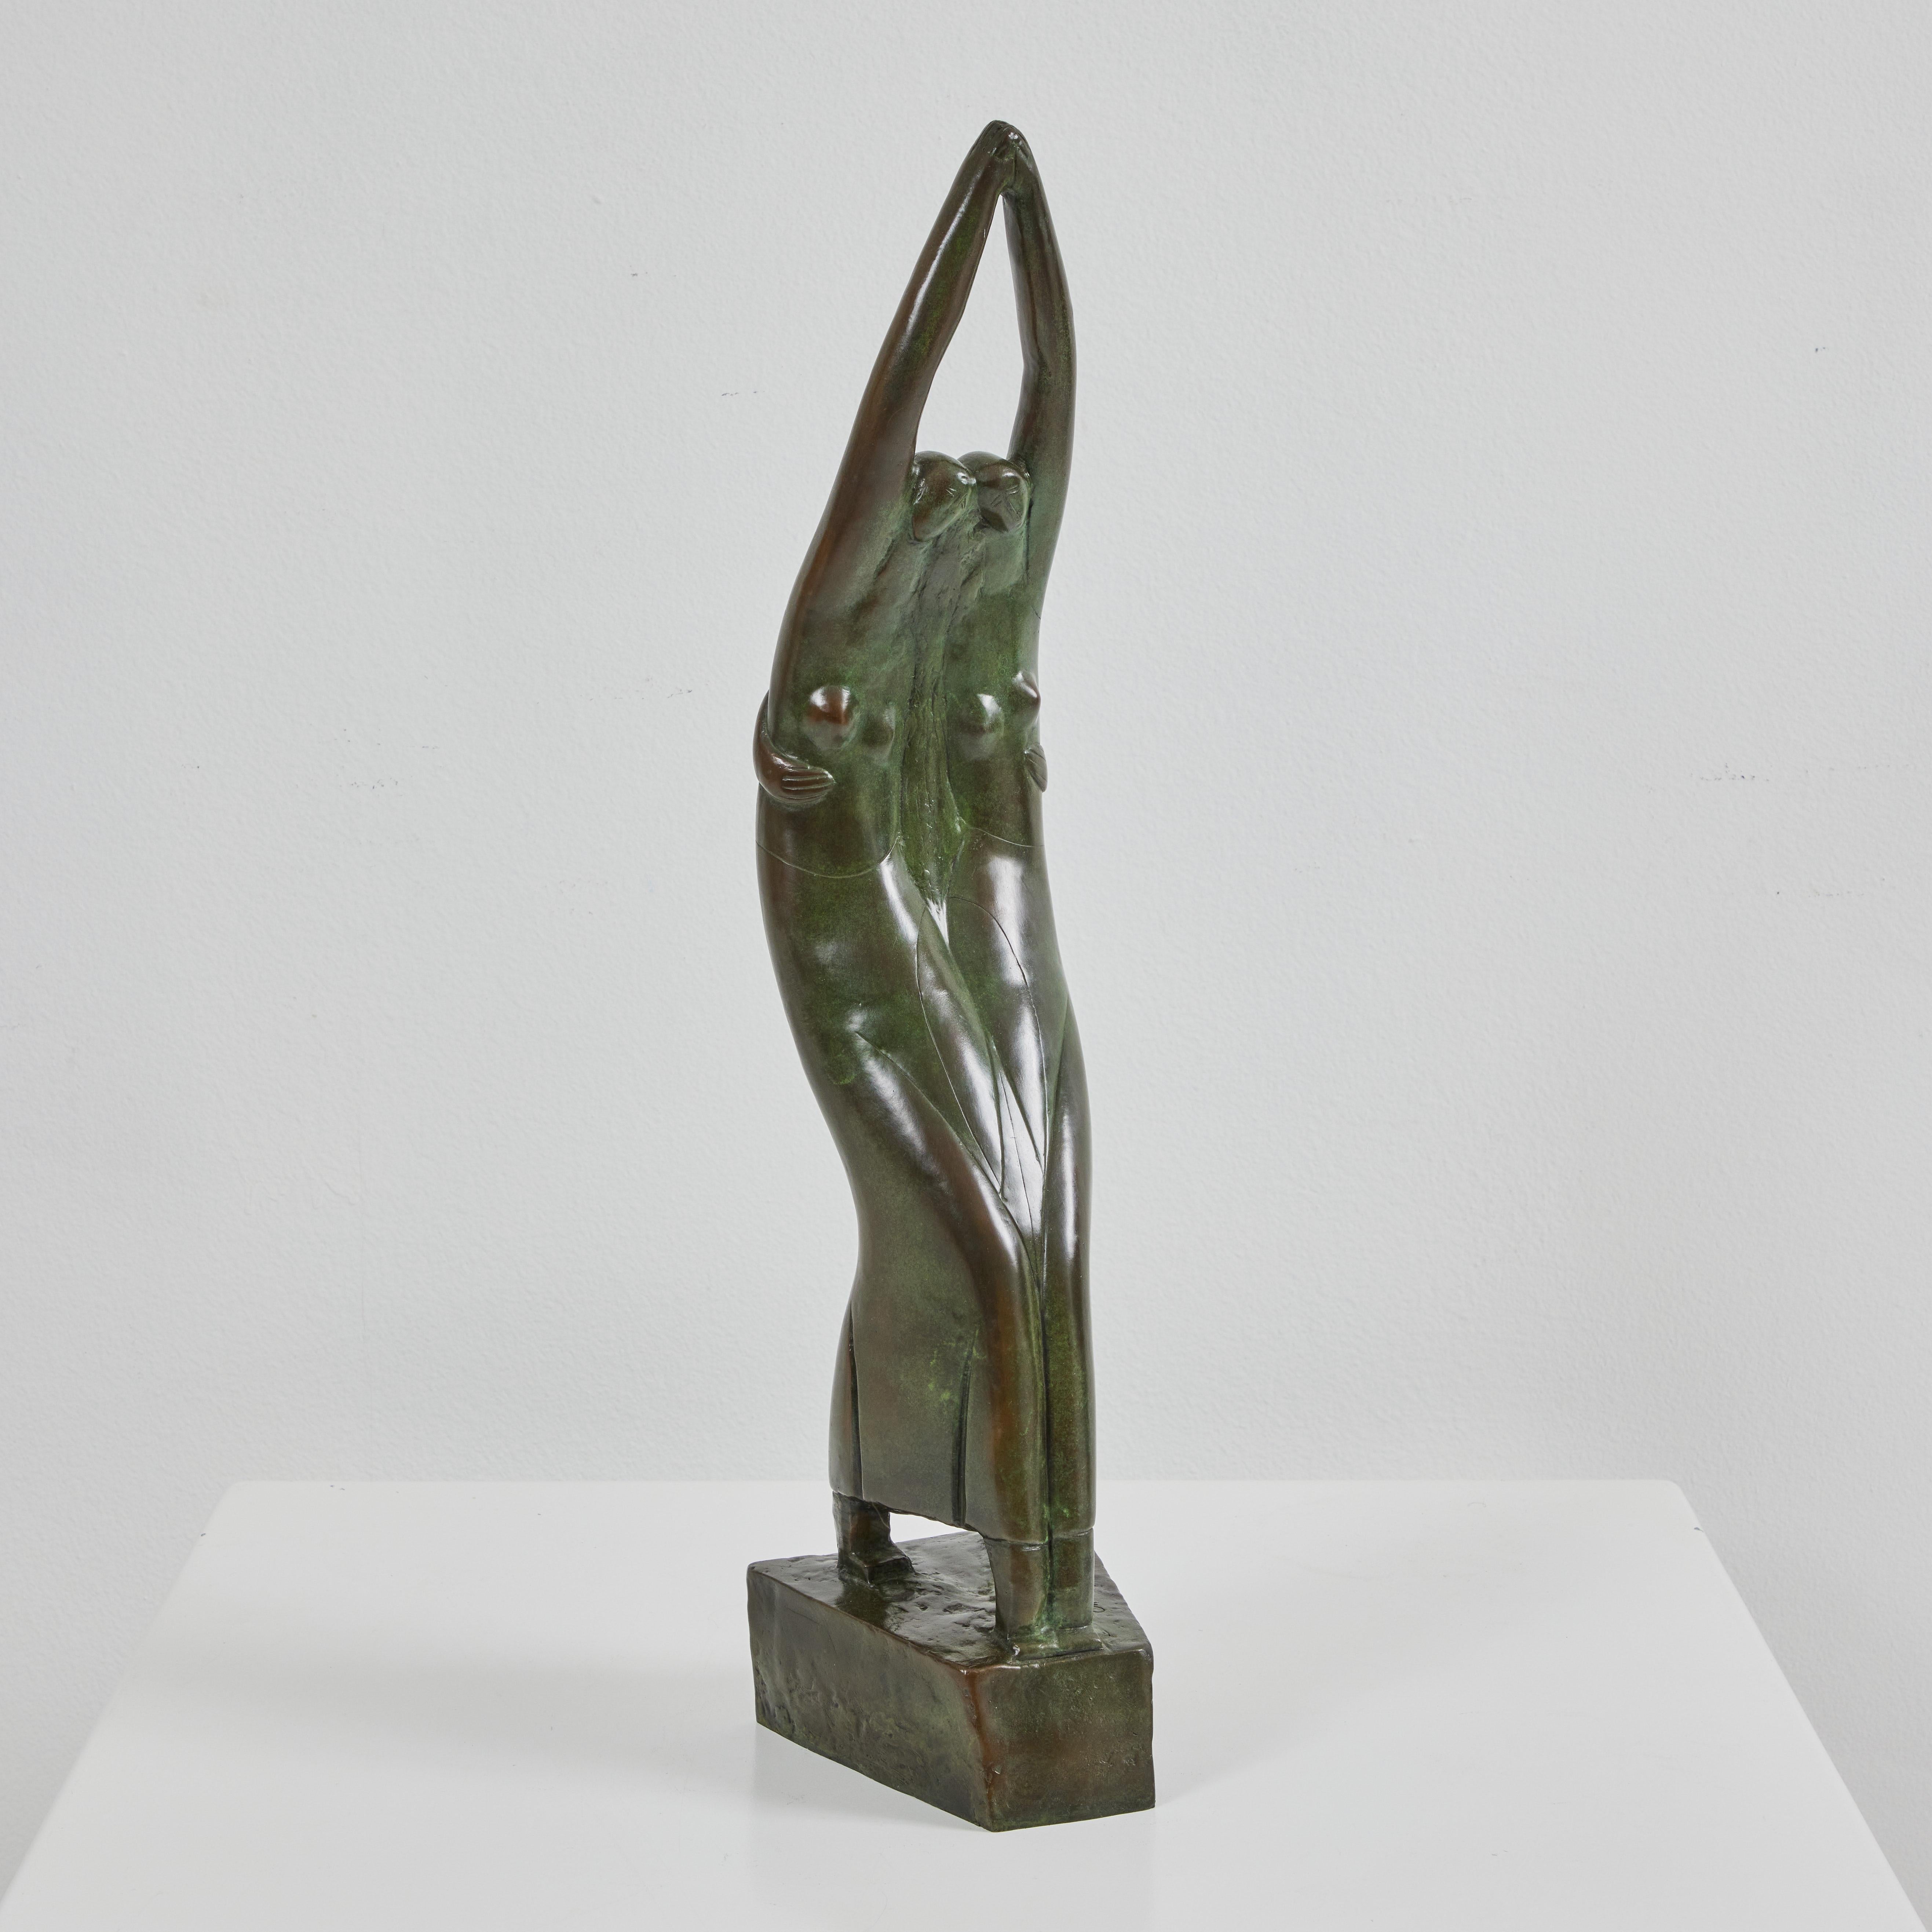 This exquisite bronze statue by Chana Orloff portrays two intertwined female dancers. It is signed by Orloff on the top of the bronze base and stamped with the Foundry 